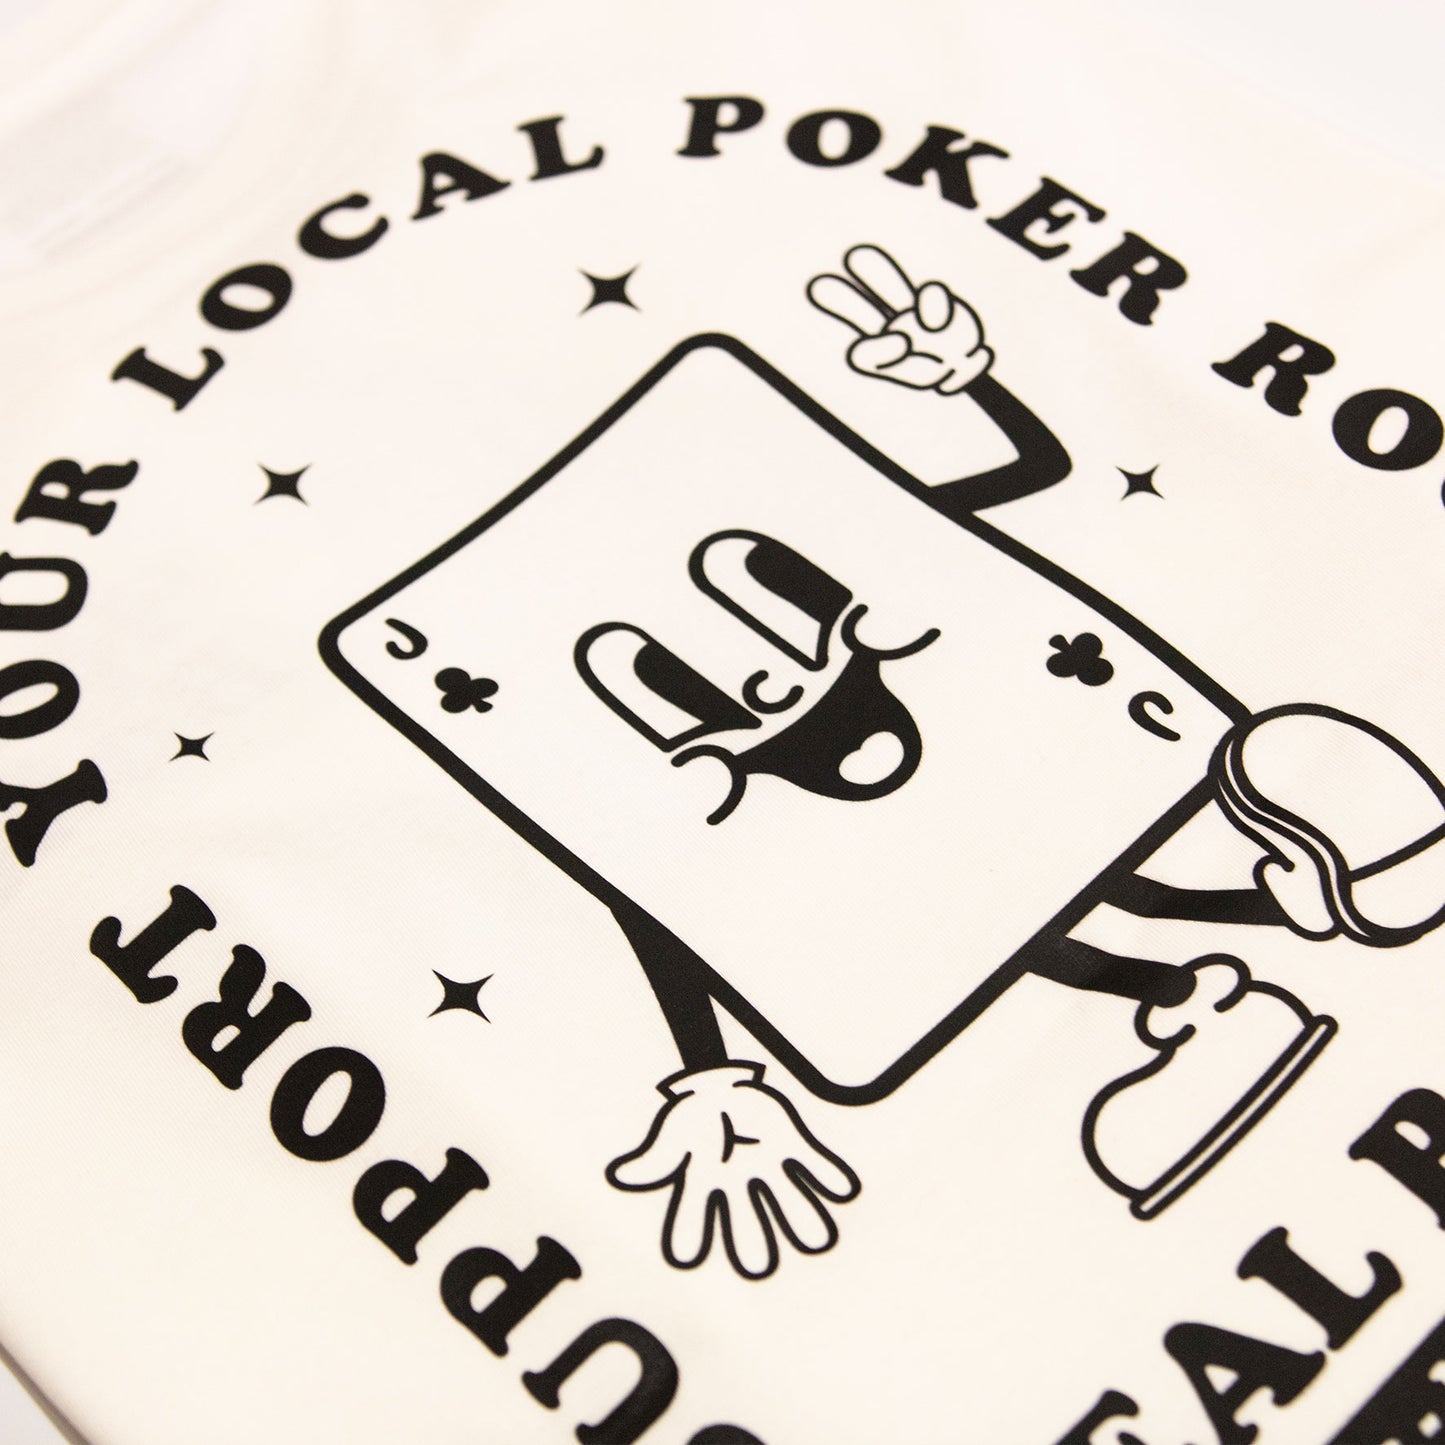 T-shirt Support your local poker room - Off White